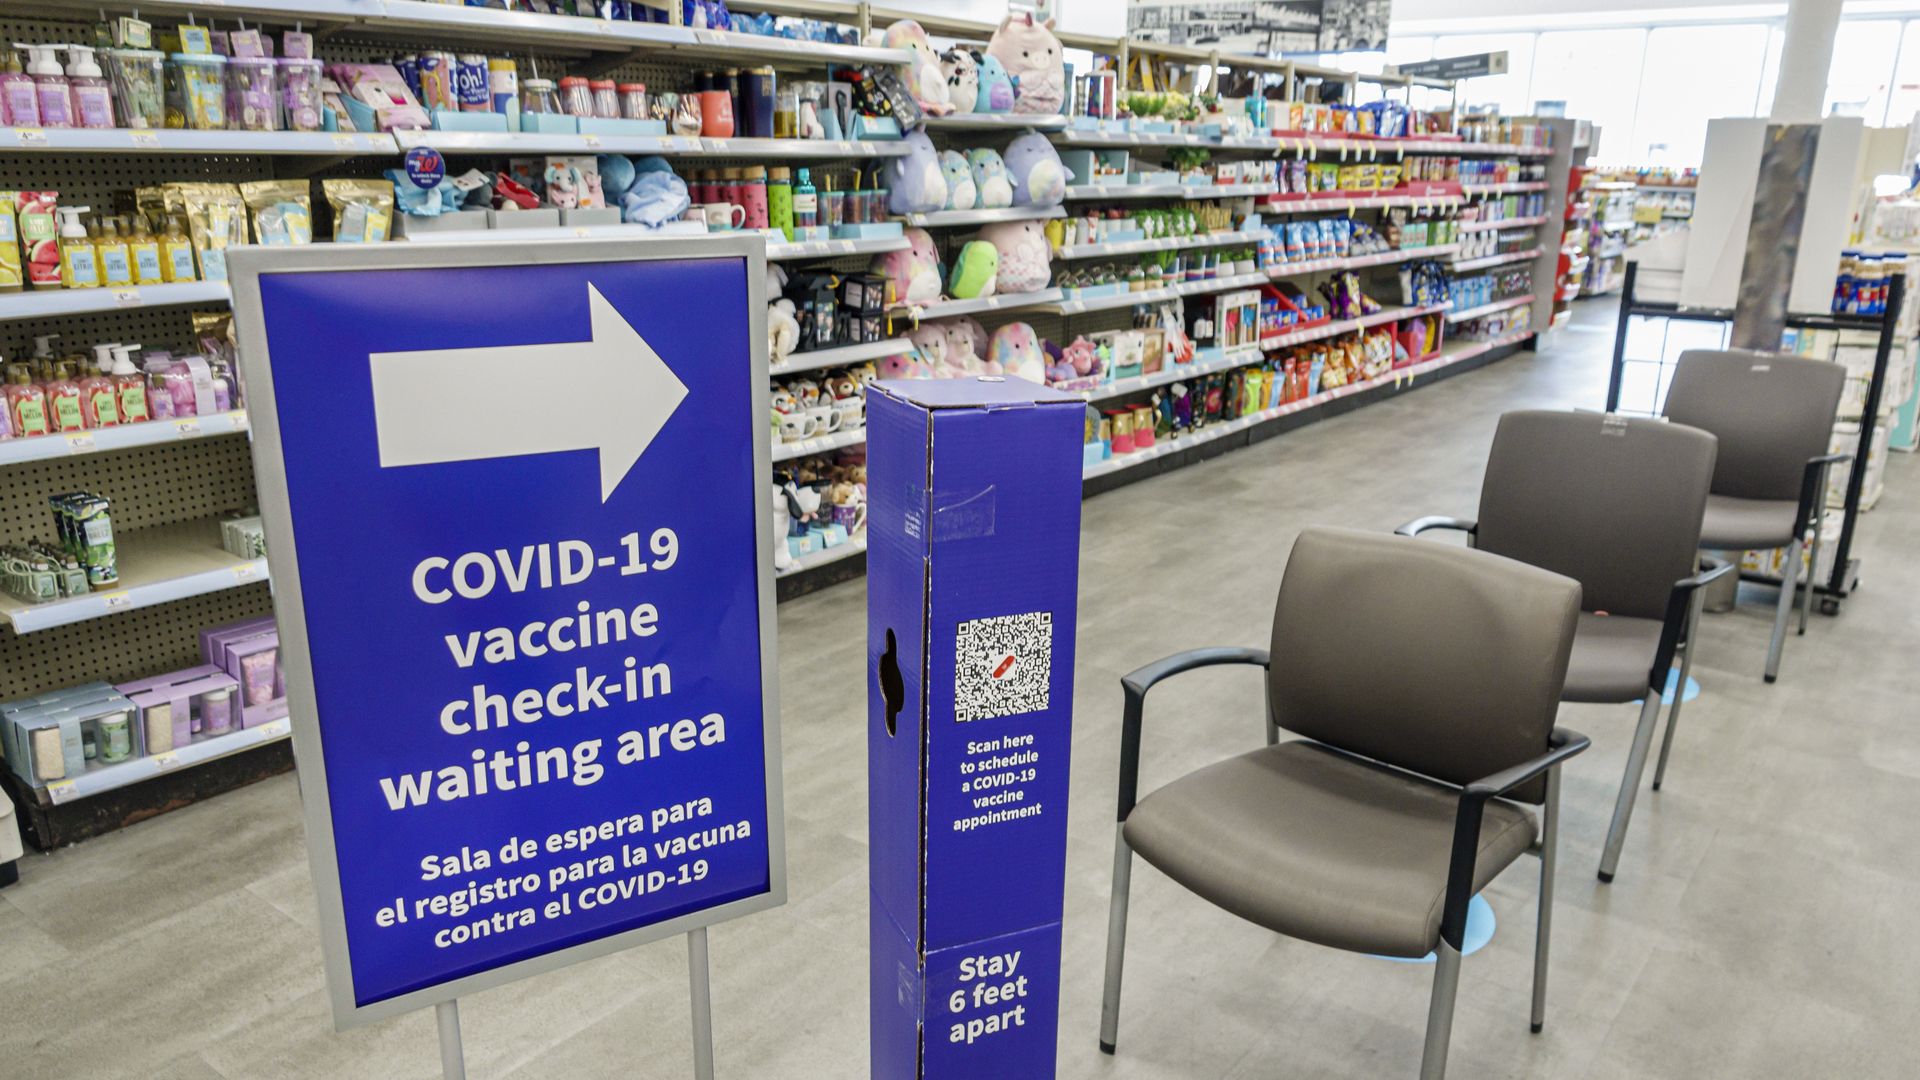 A COVID-19 vaccine check-in waiting area at a pharmacy.